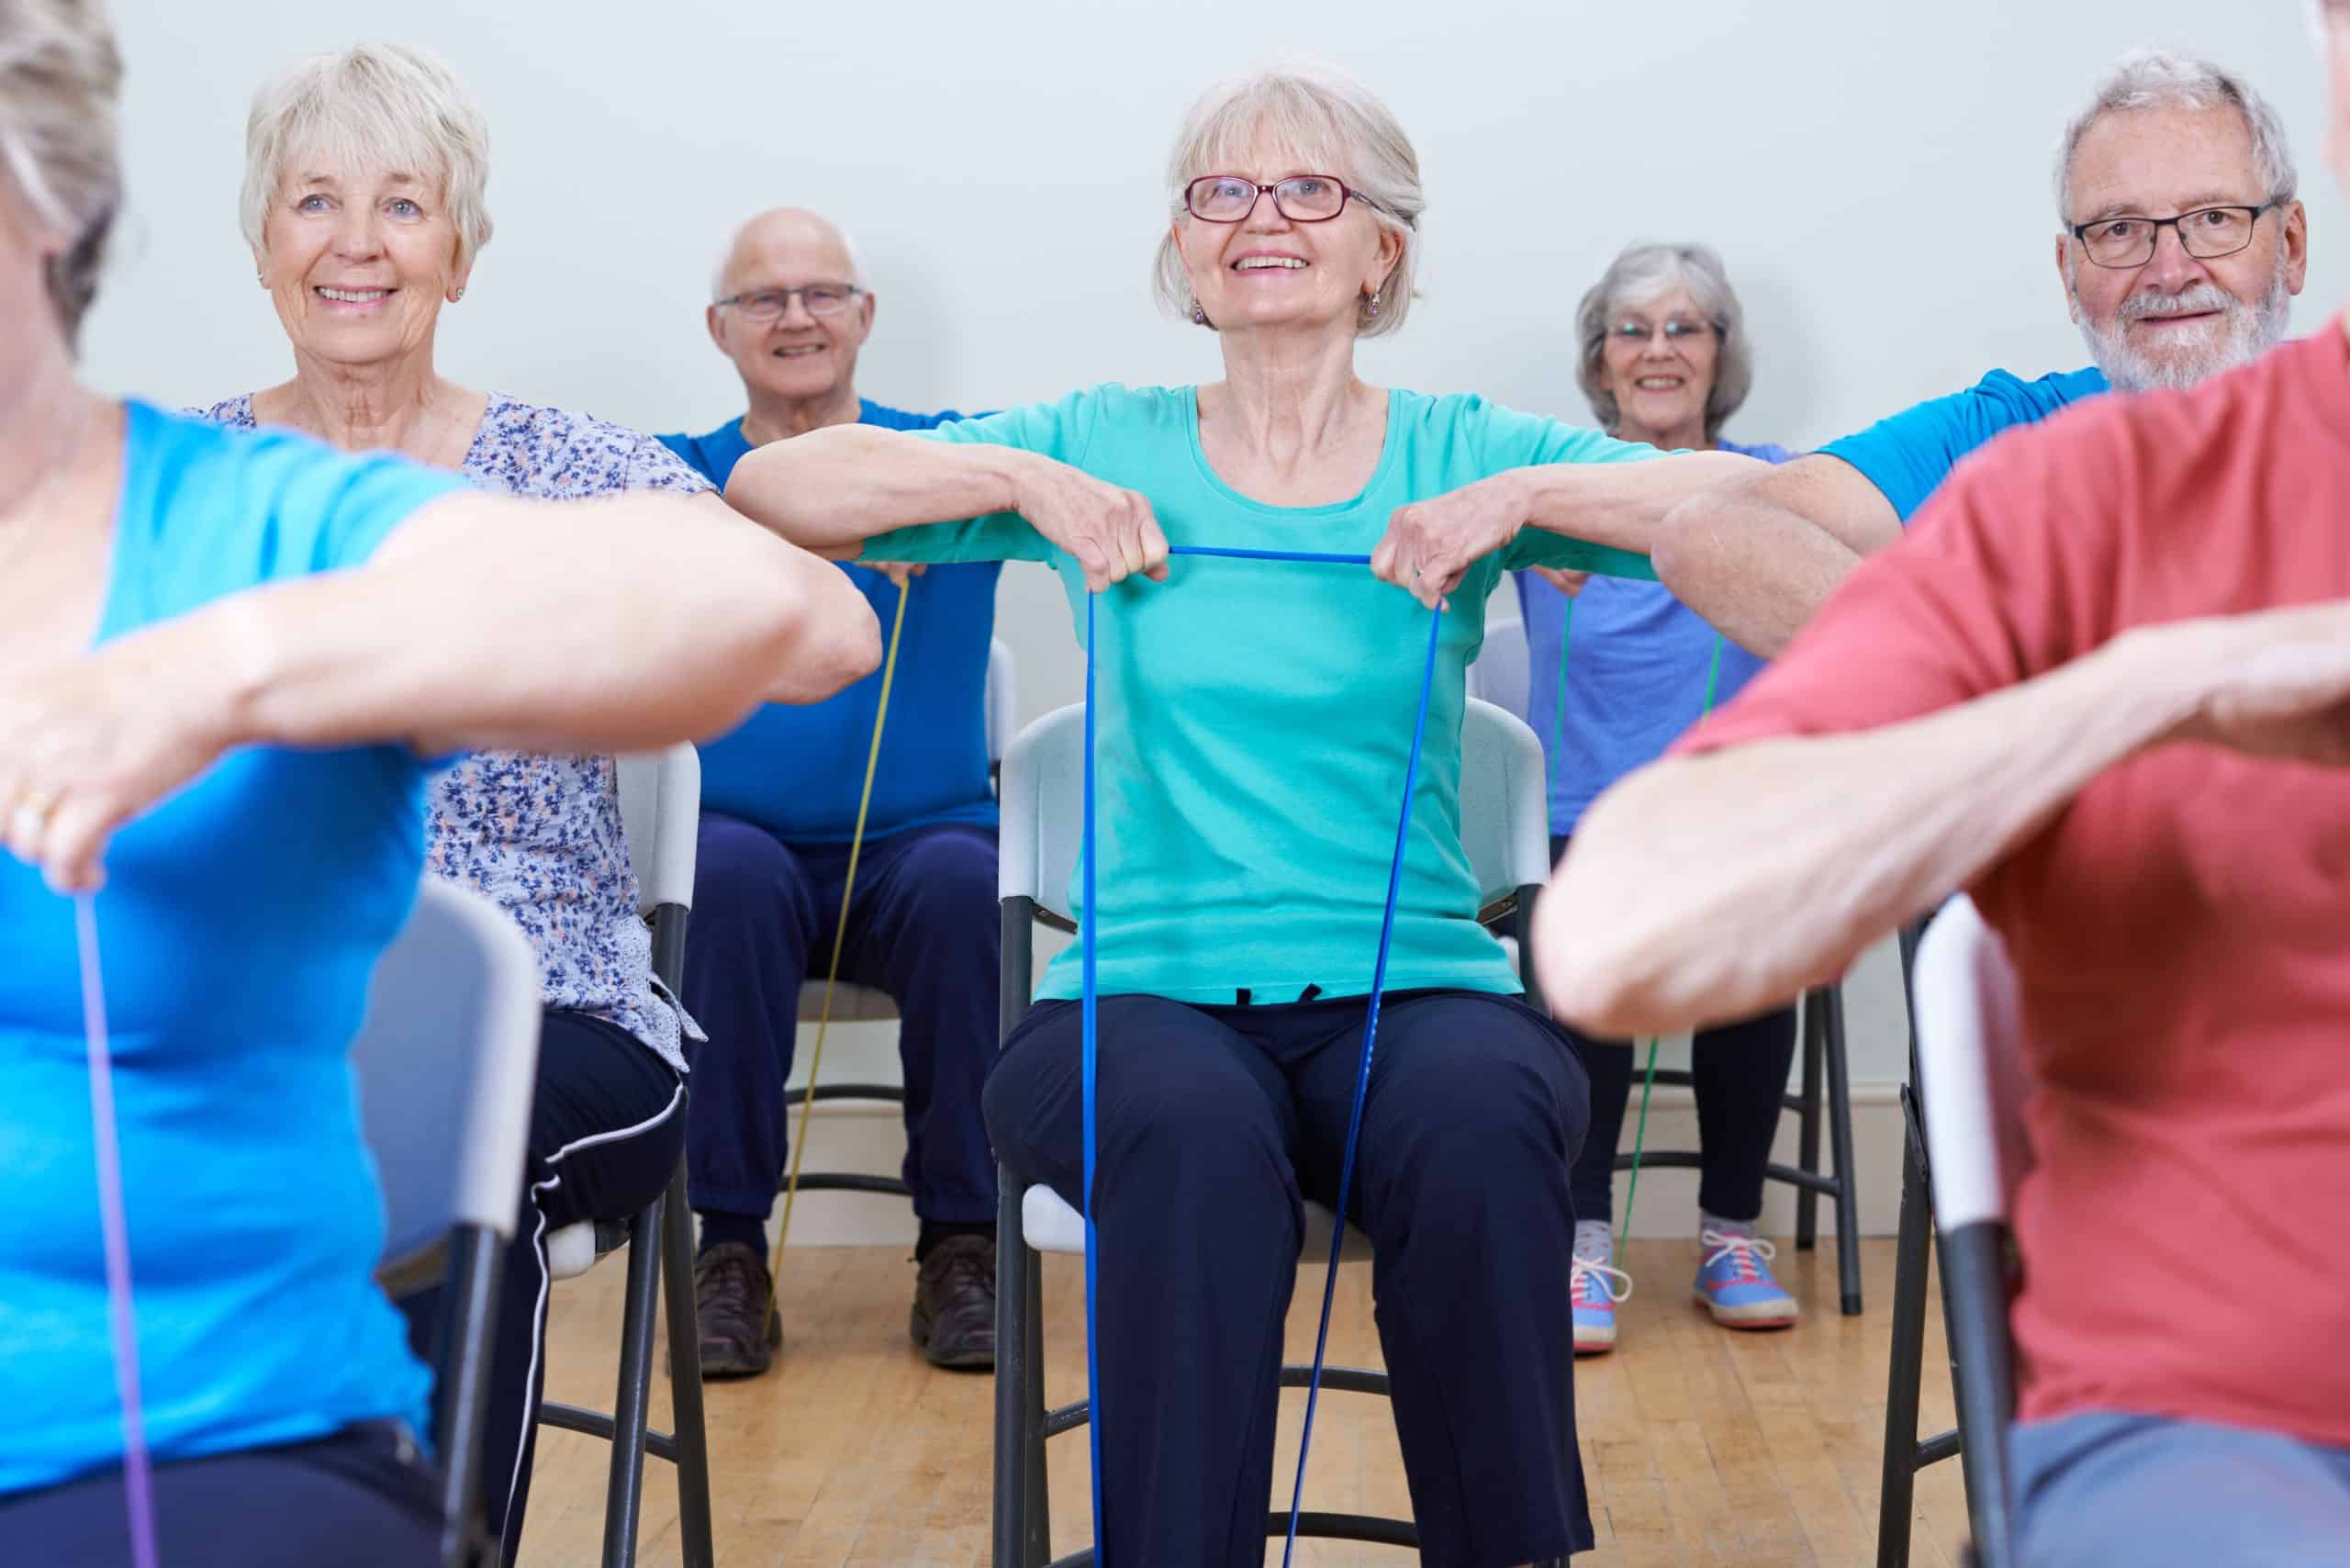 Daily Chair Exercises For Seniors - Discovery Village